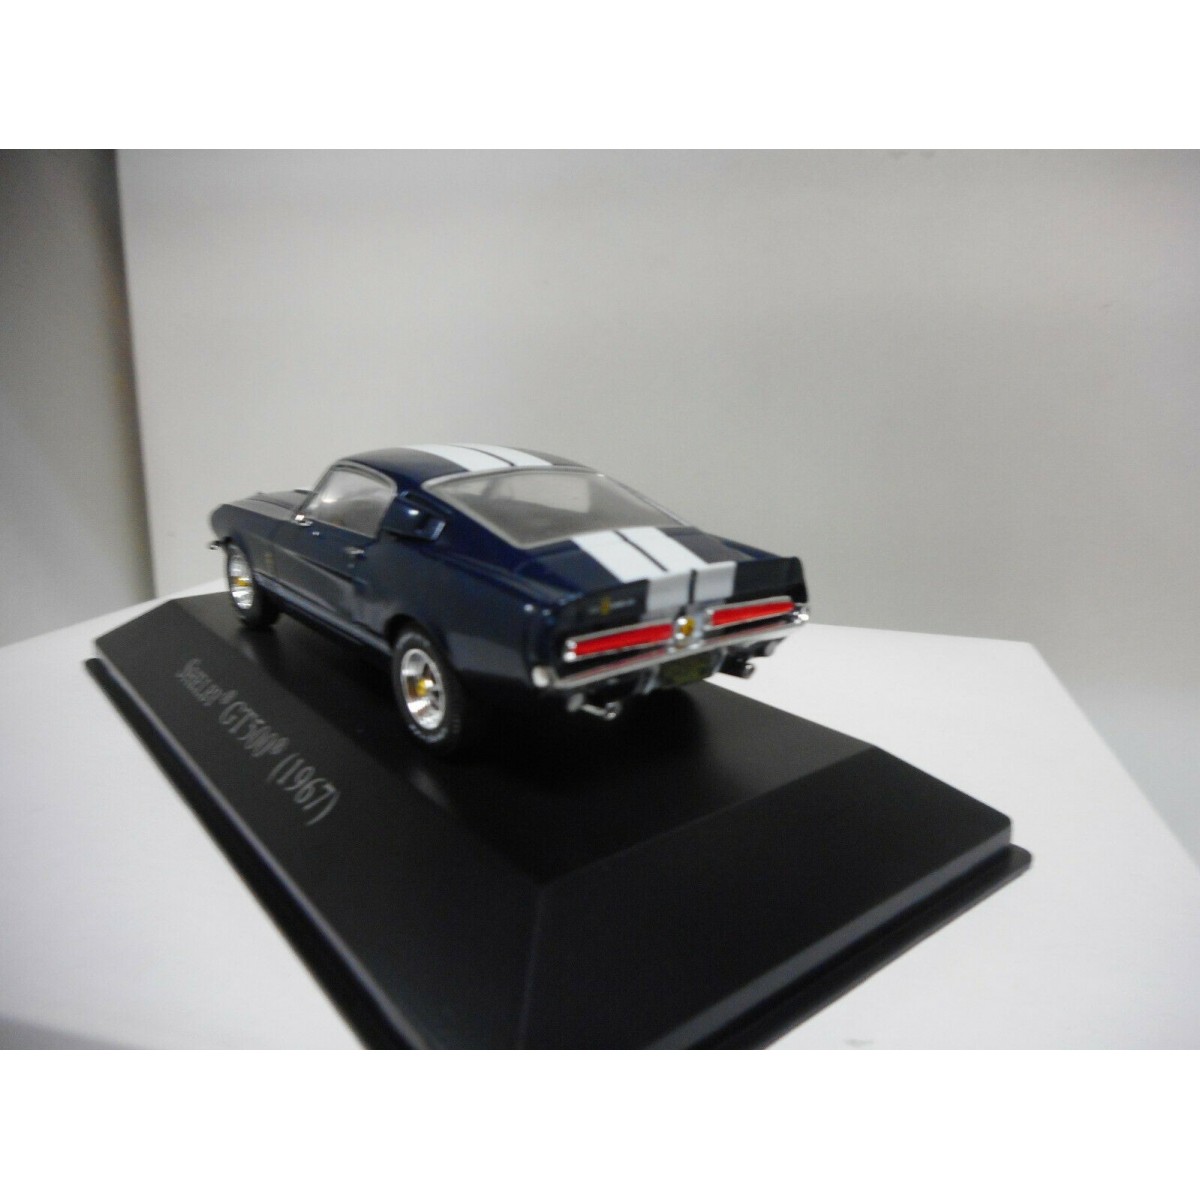 FORD Mustang SHELBY GT 500 1967 IXO American Cars 1:43 CAR Mint Altaya 